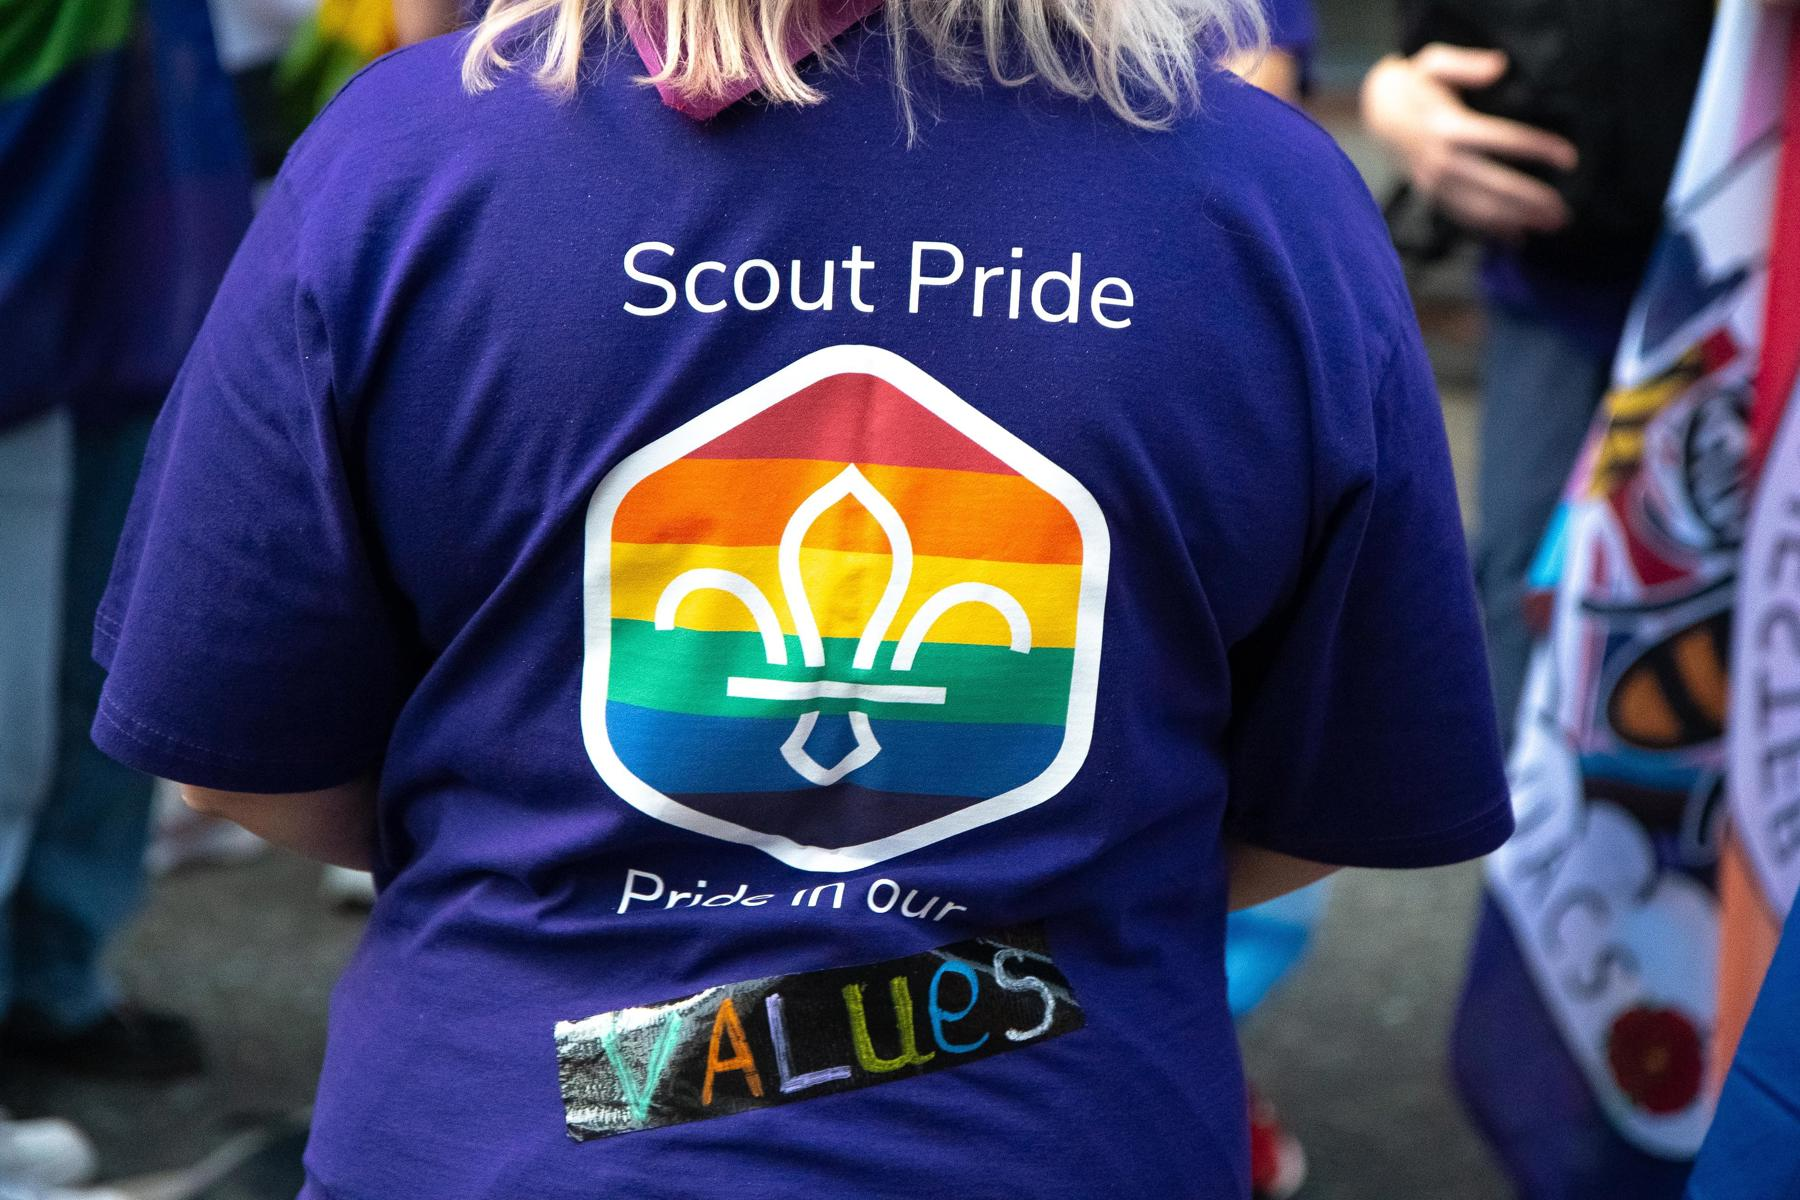 The back of a purple t-shirt with a Scout pride badge print and the text "Scout pride", "Pride in our values"